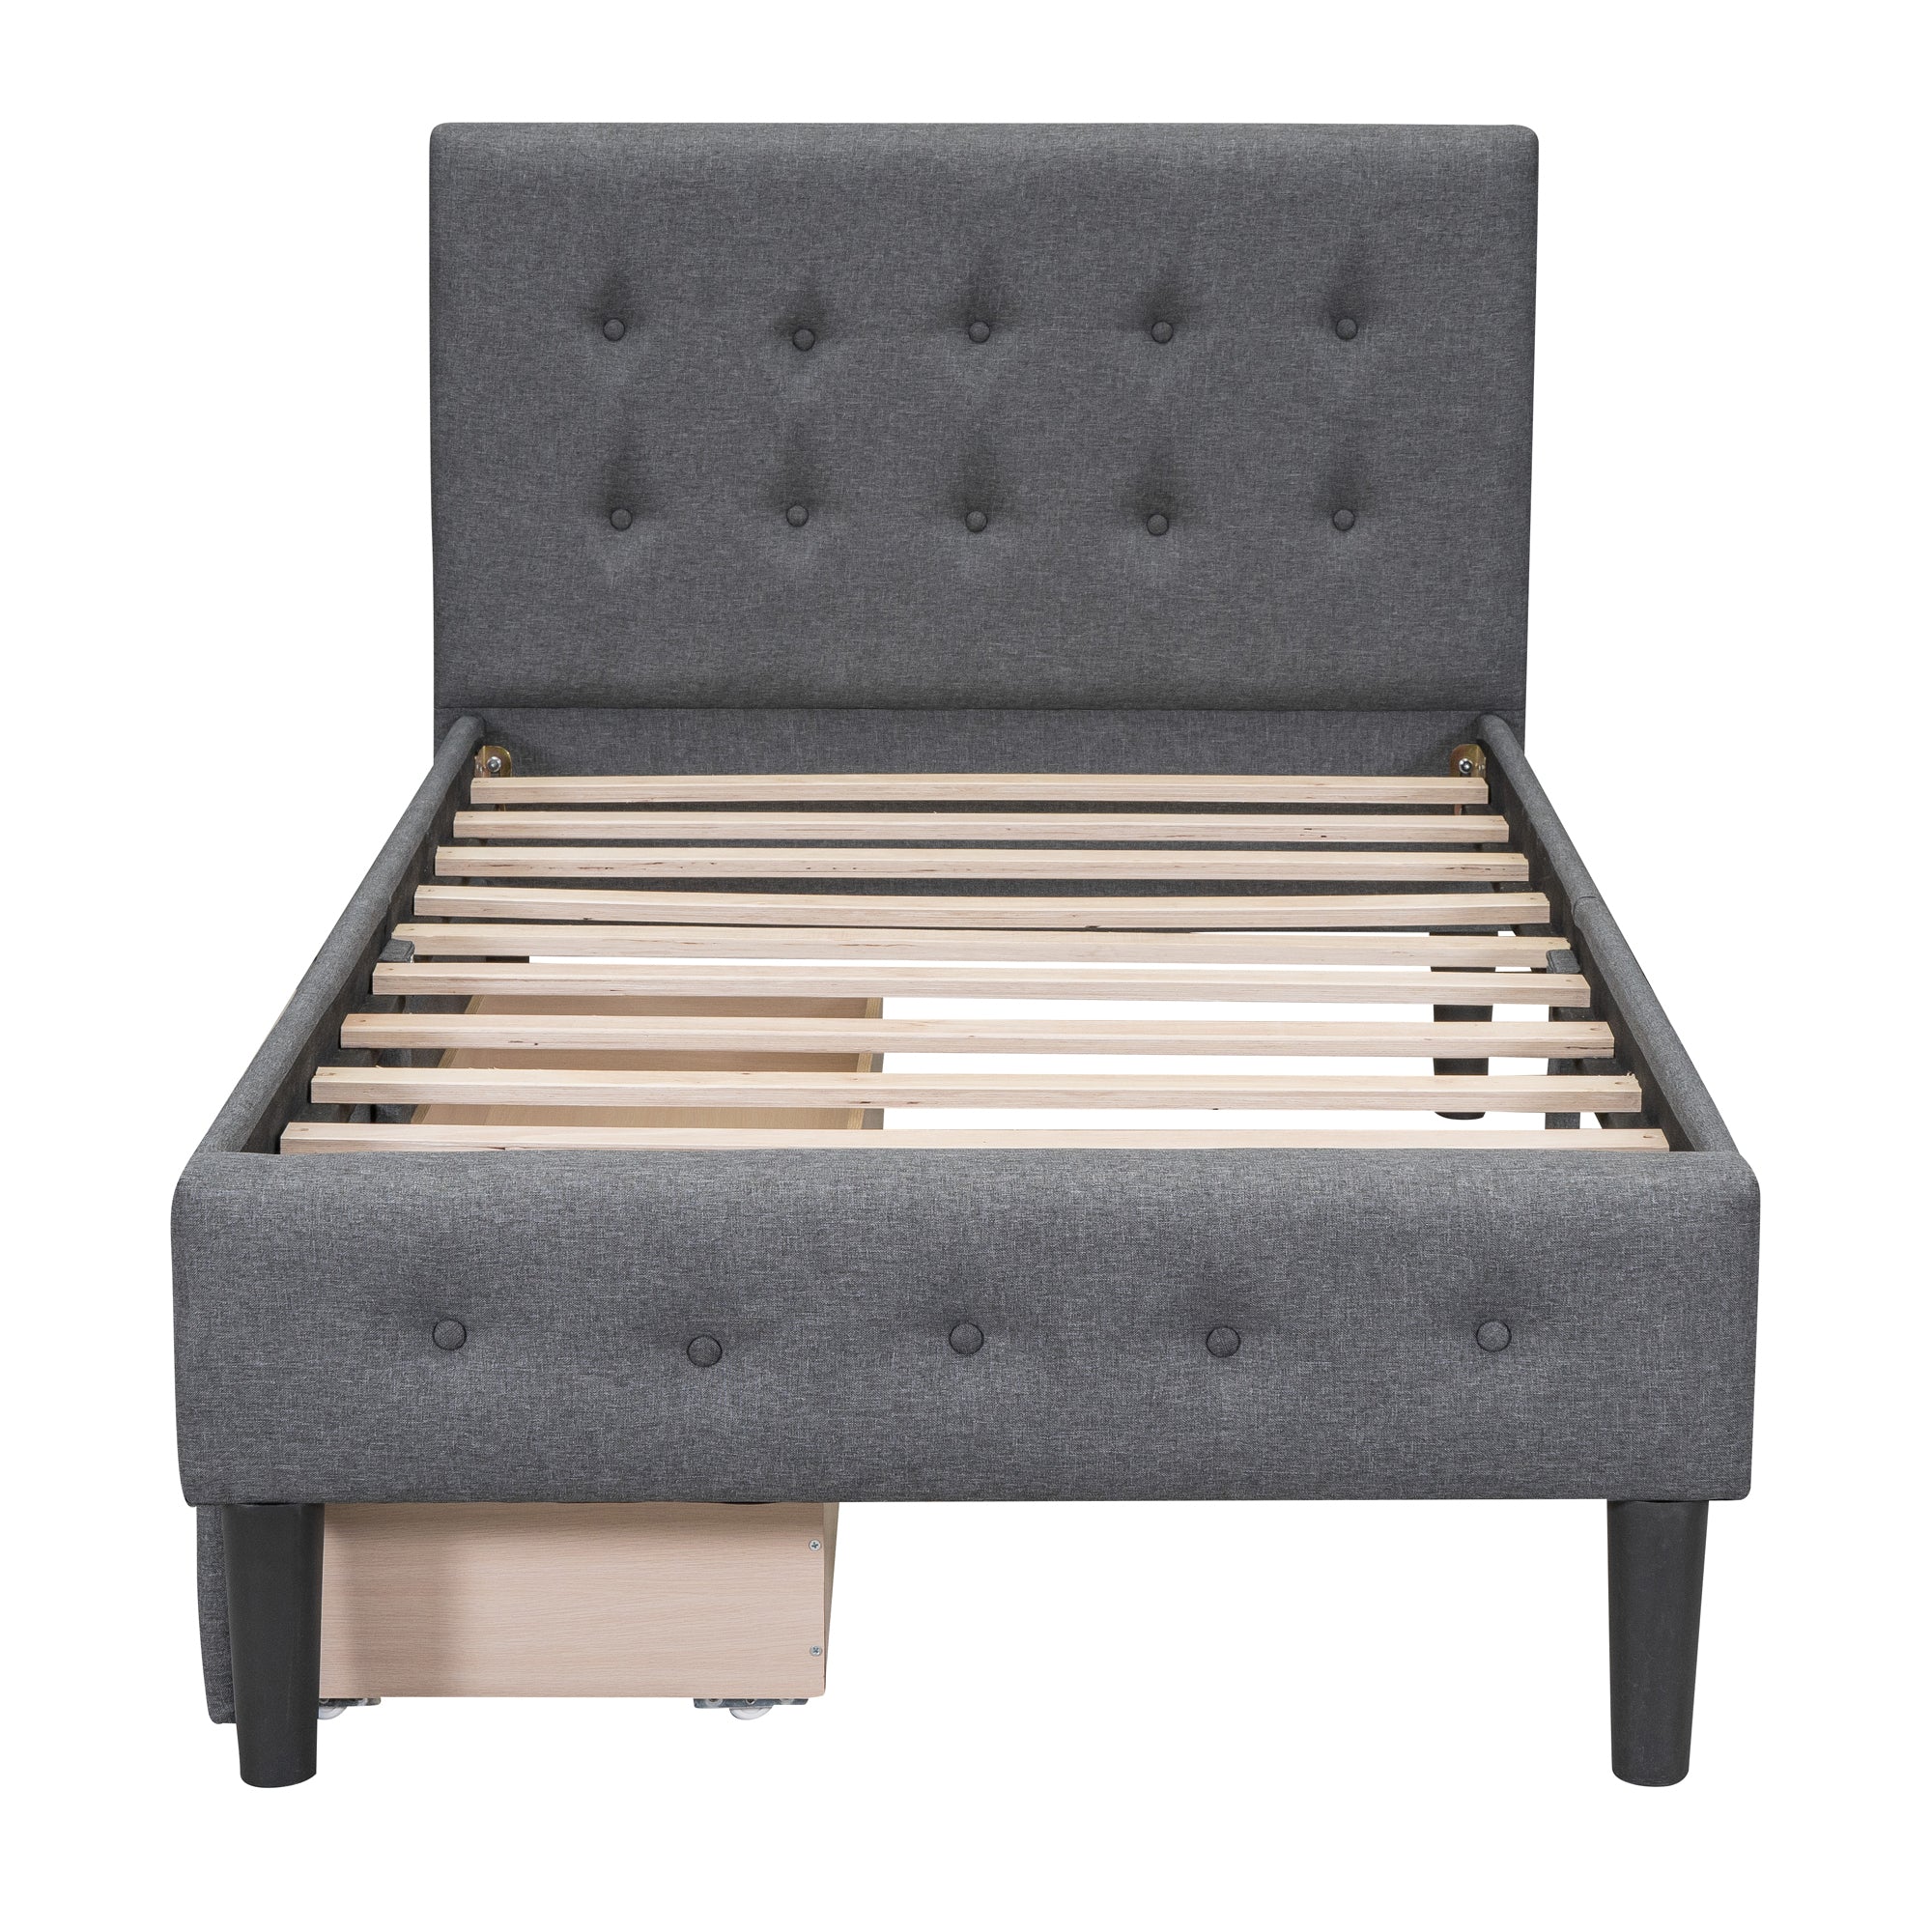 Twin Size Upholstered Platform Bed with 2 Drawers, gray-upholstered